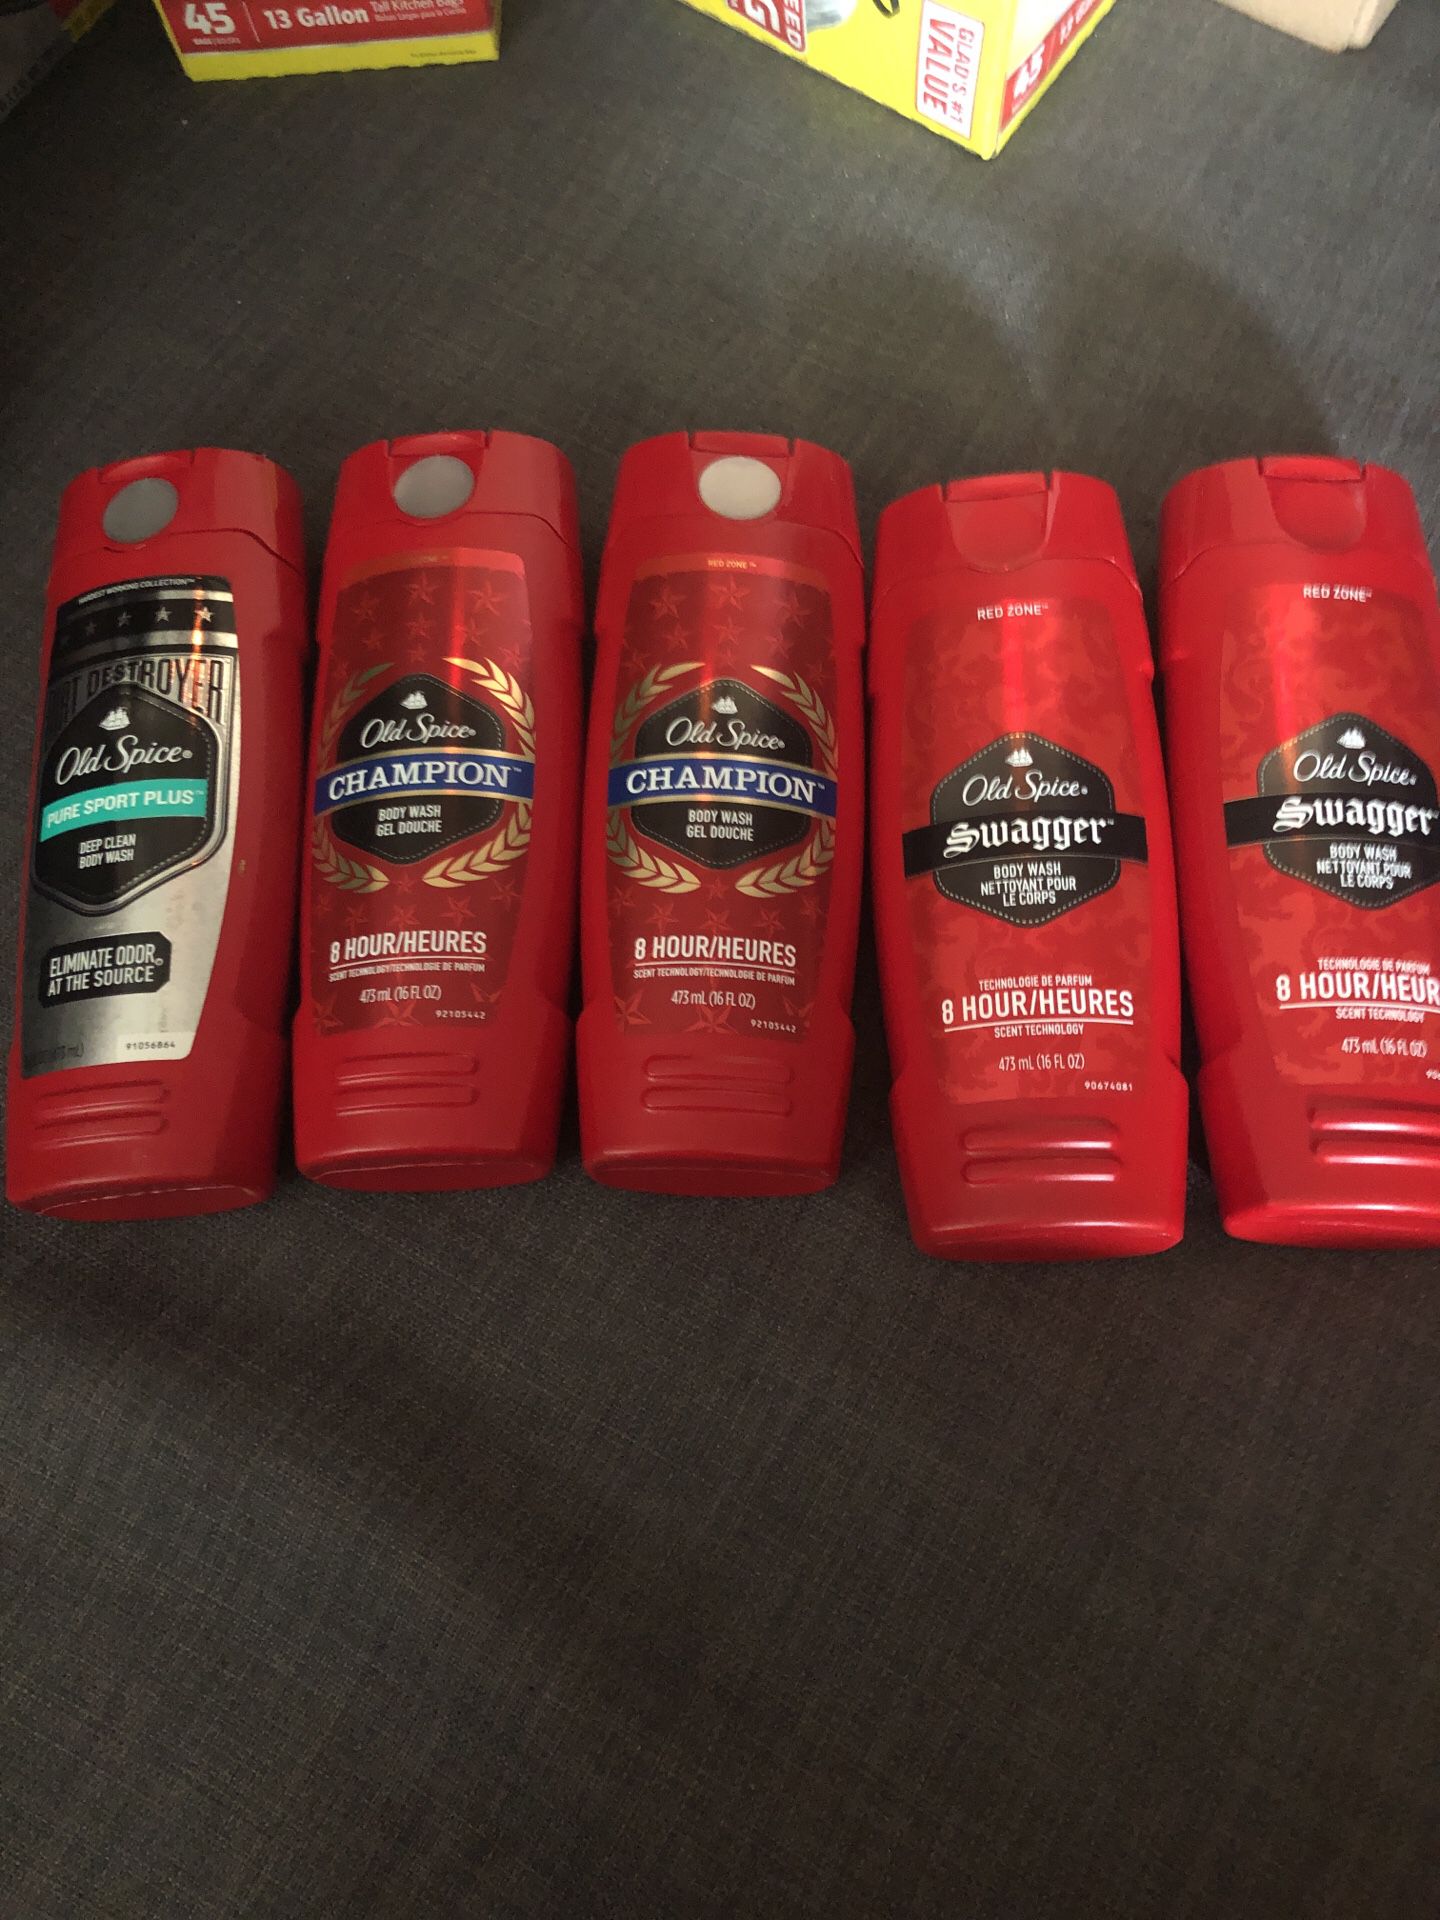 5 Bottles of Old Spice. Please see all the pictures and read the description